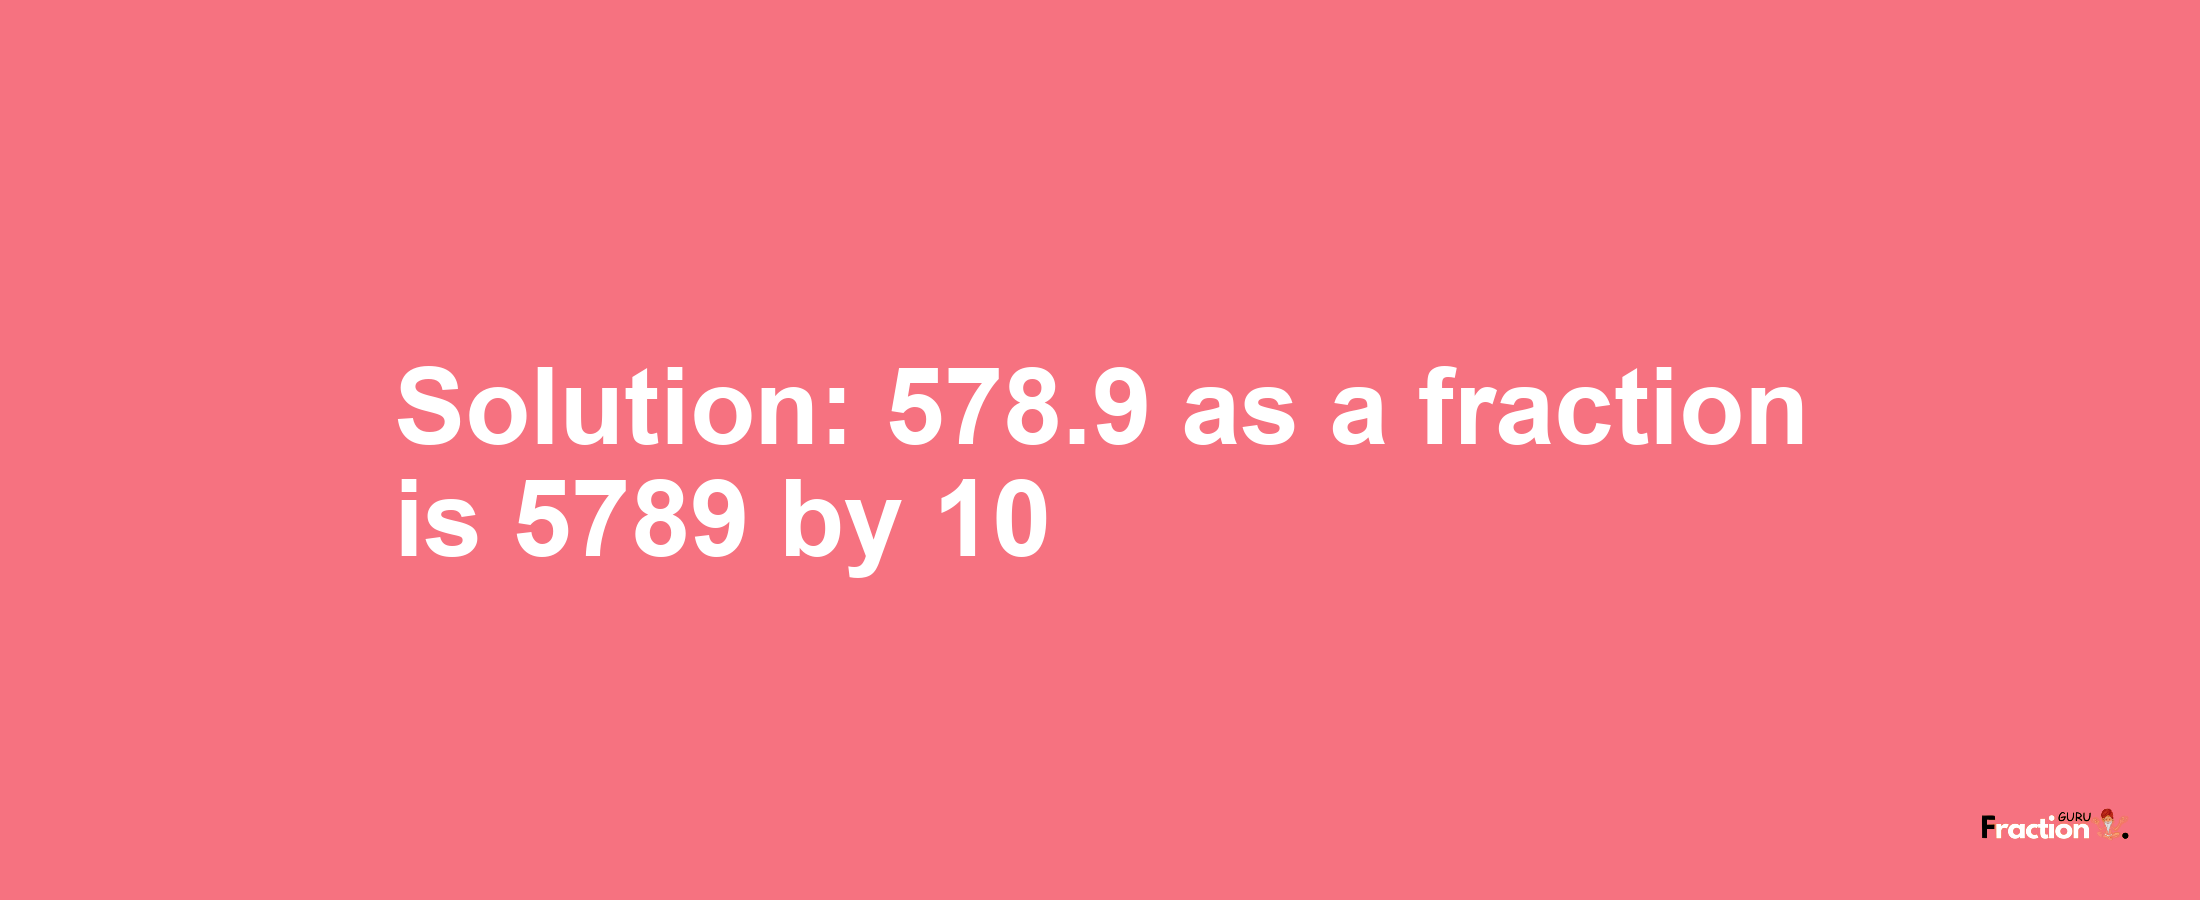 Solution:578.9 as a fraction is 5789/10